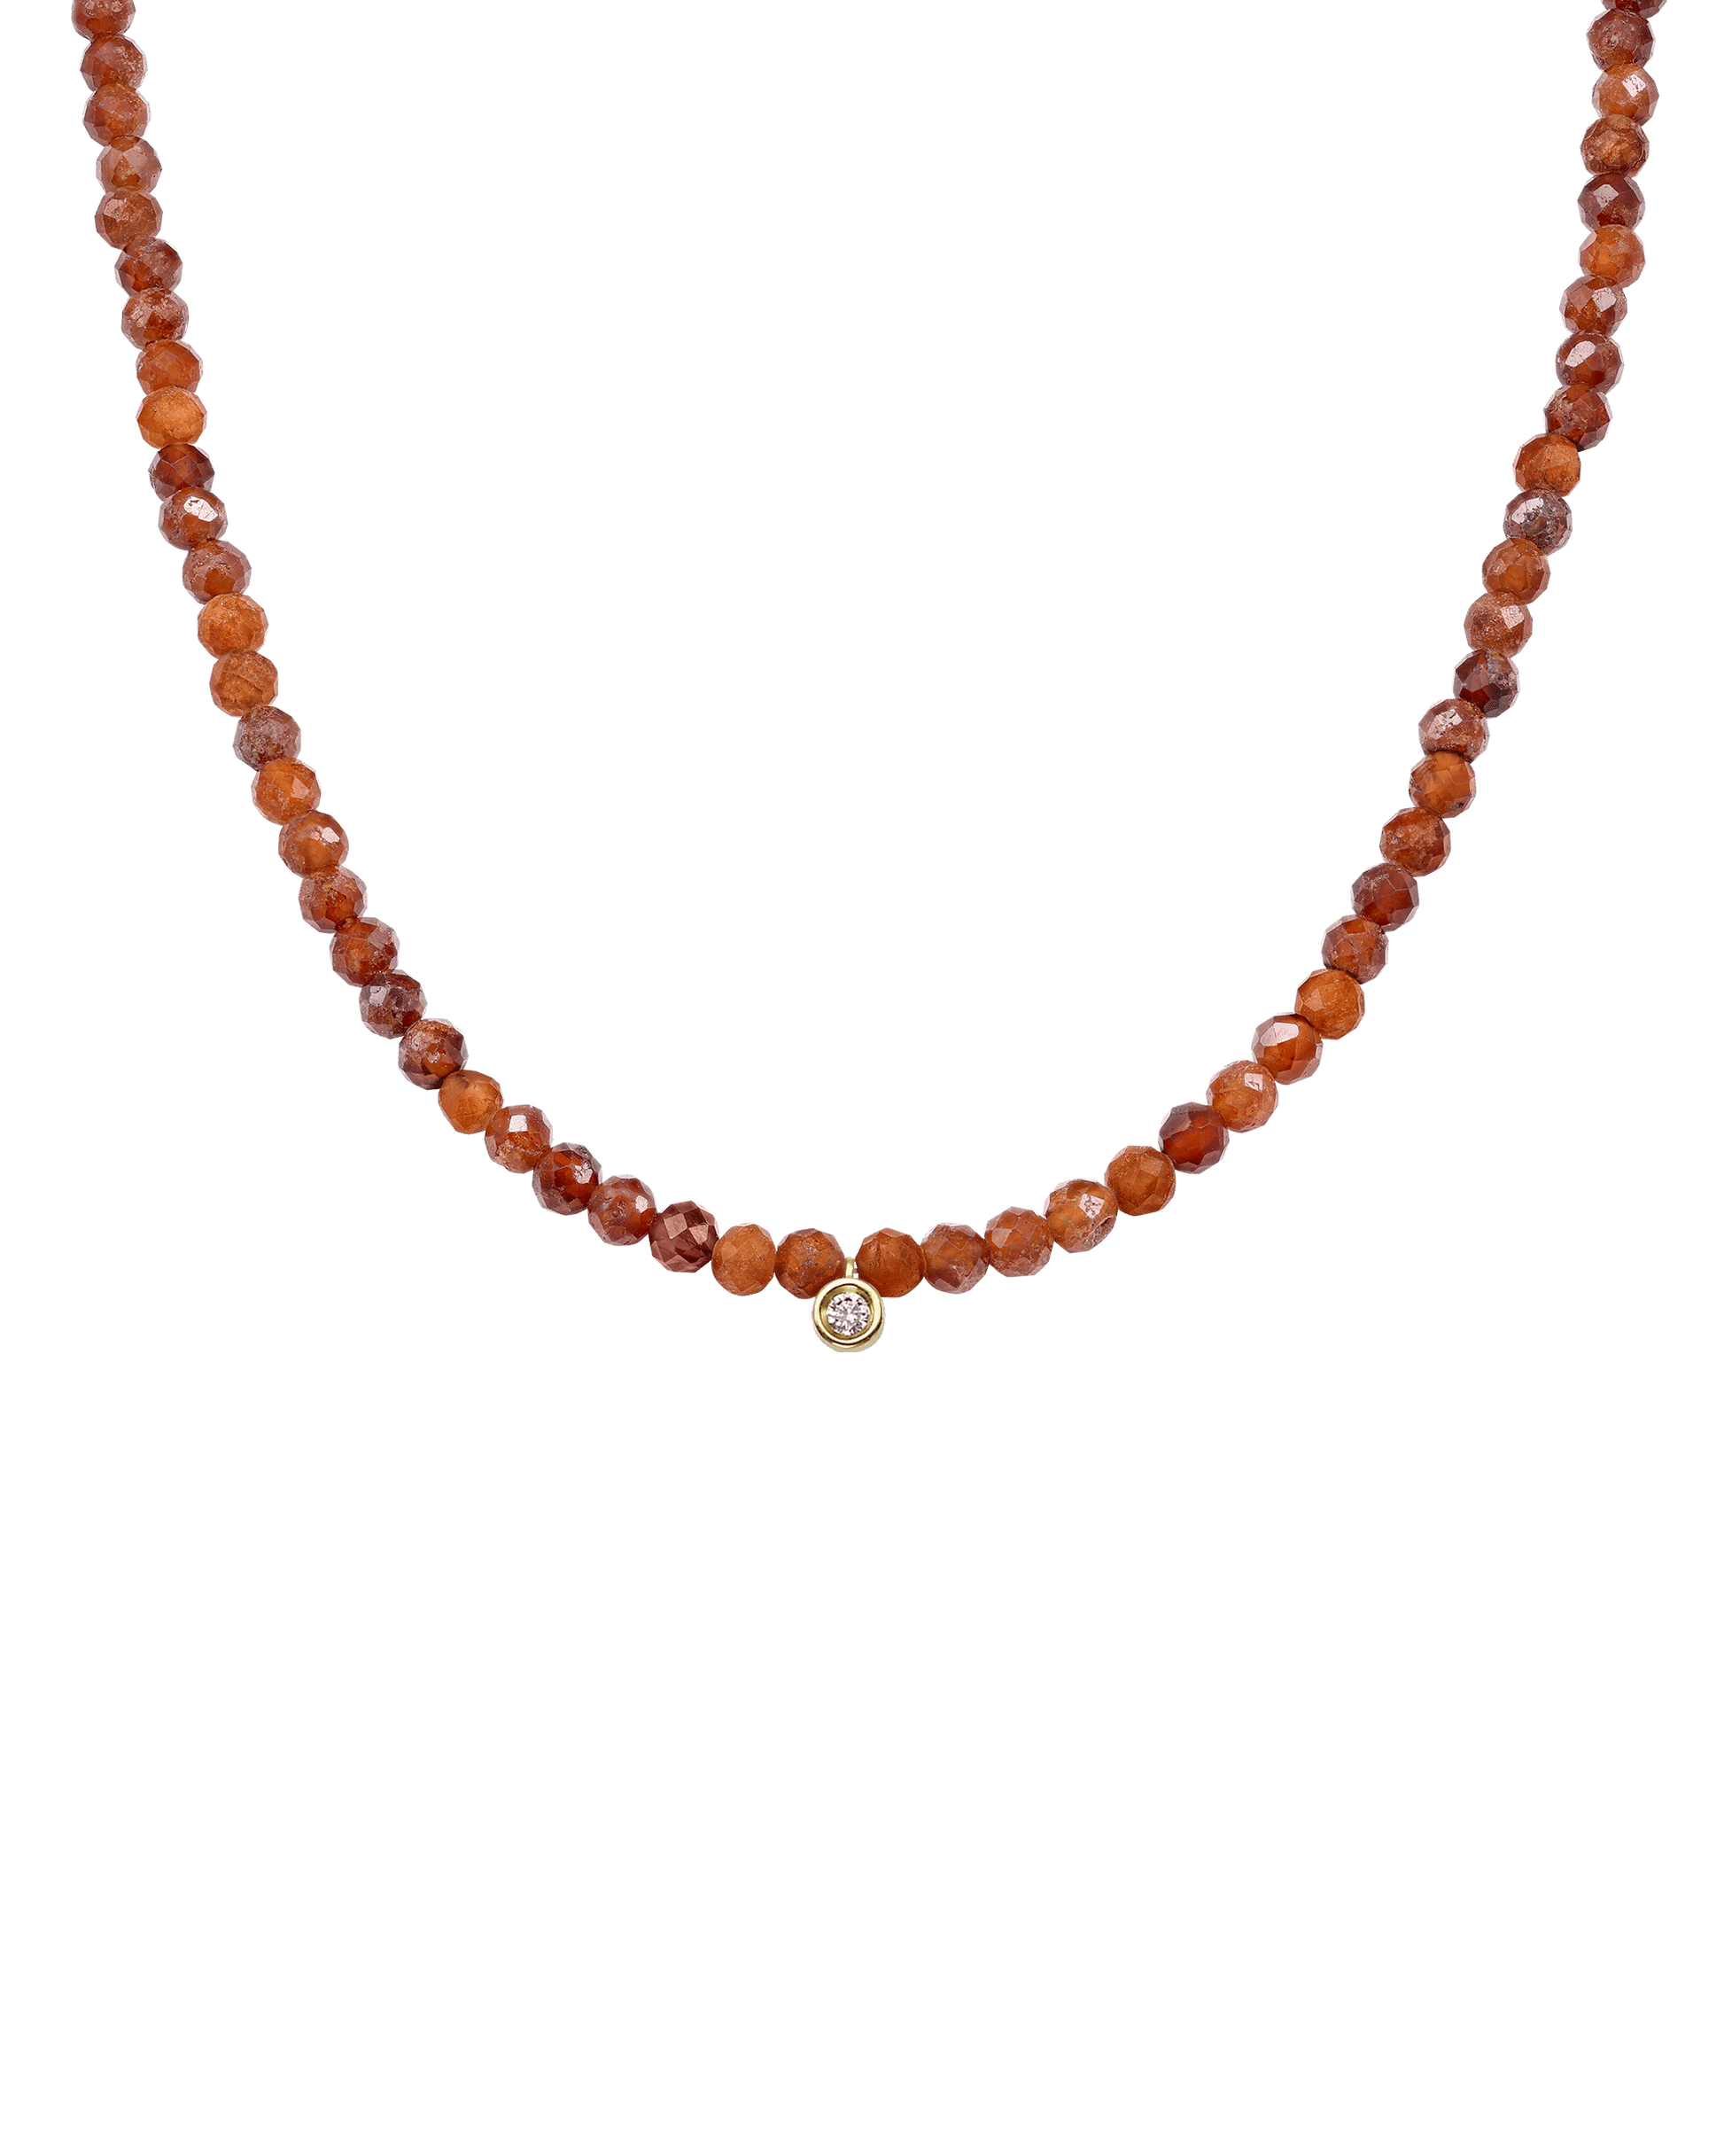 The Gemstone & Diamond Necklace - 14K Yellow Gold Necklaces 14K Solid Gold Natural Garnet Small: 0.03ct 14"